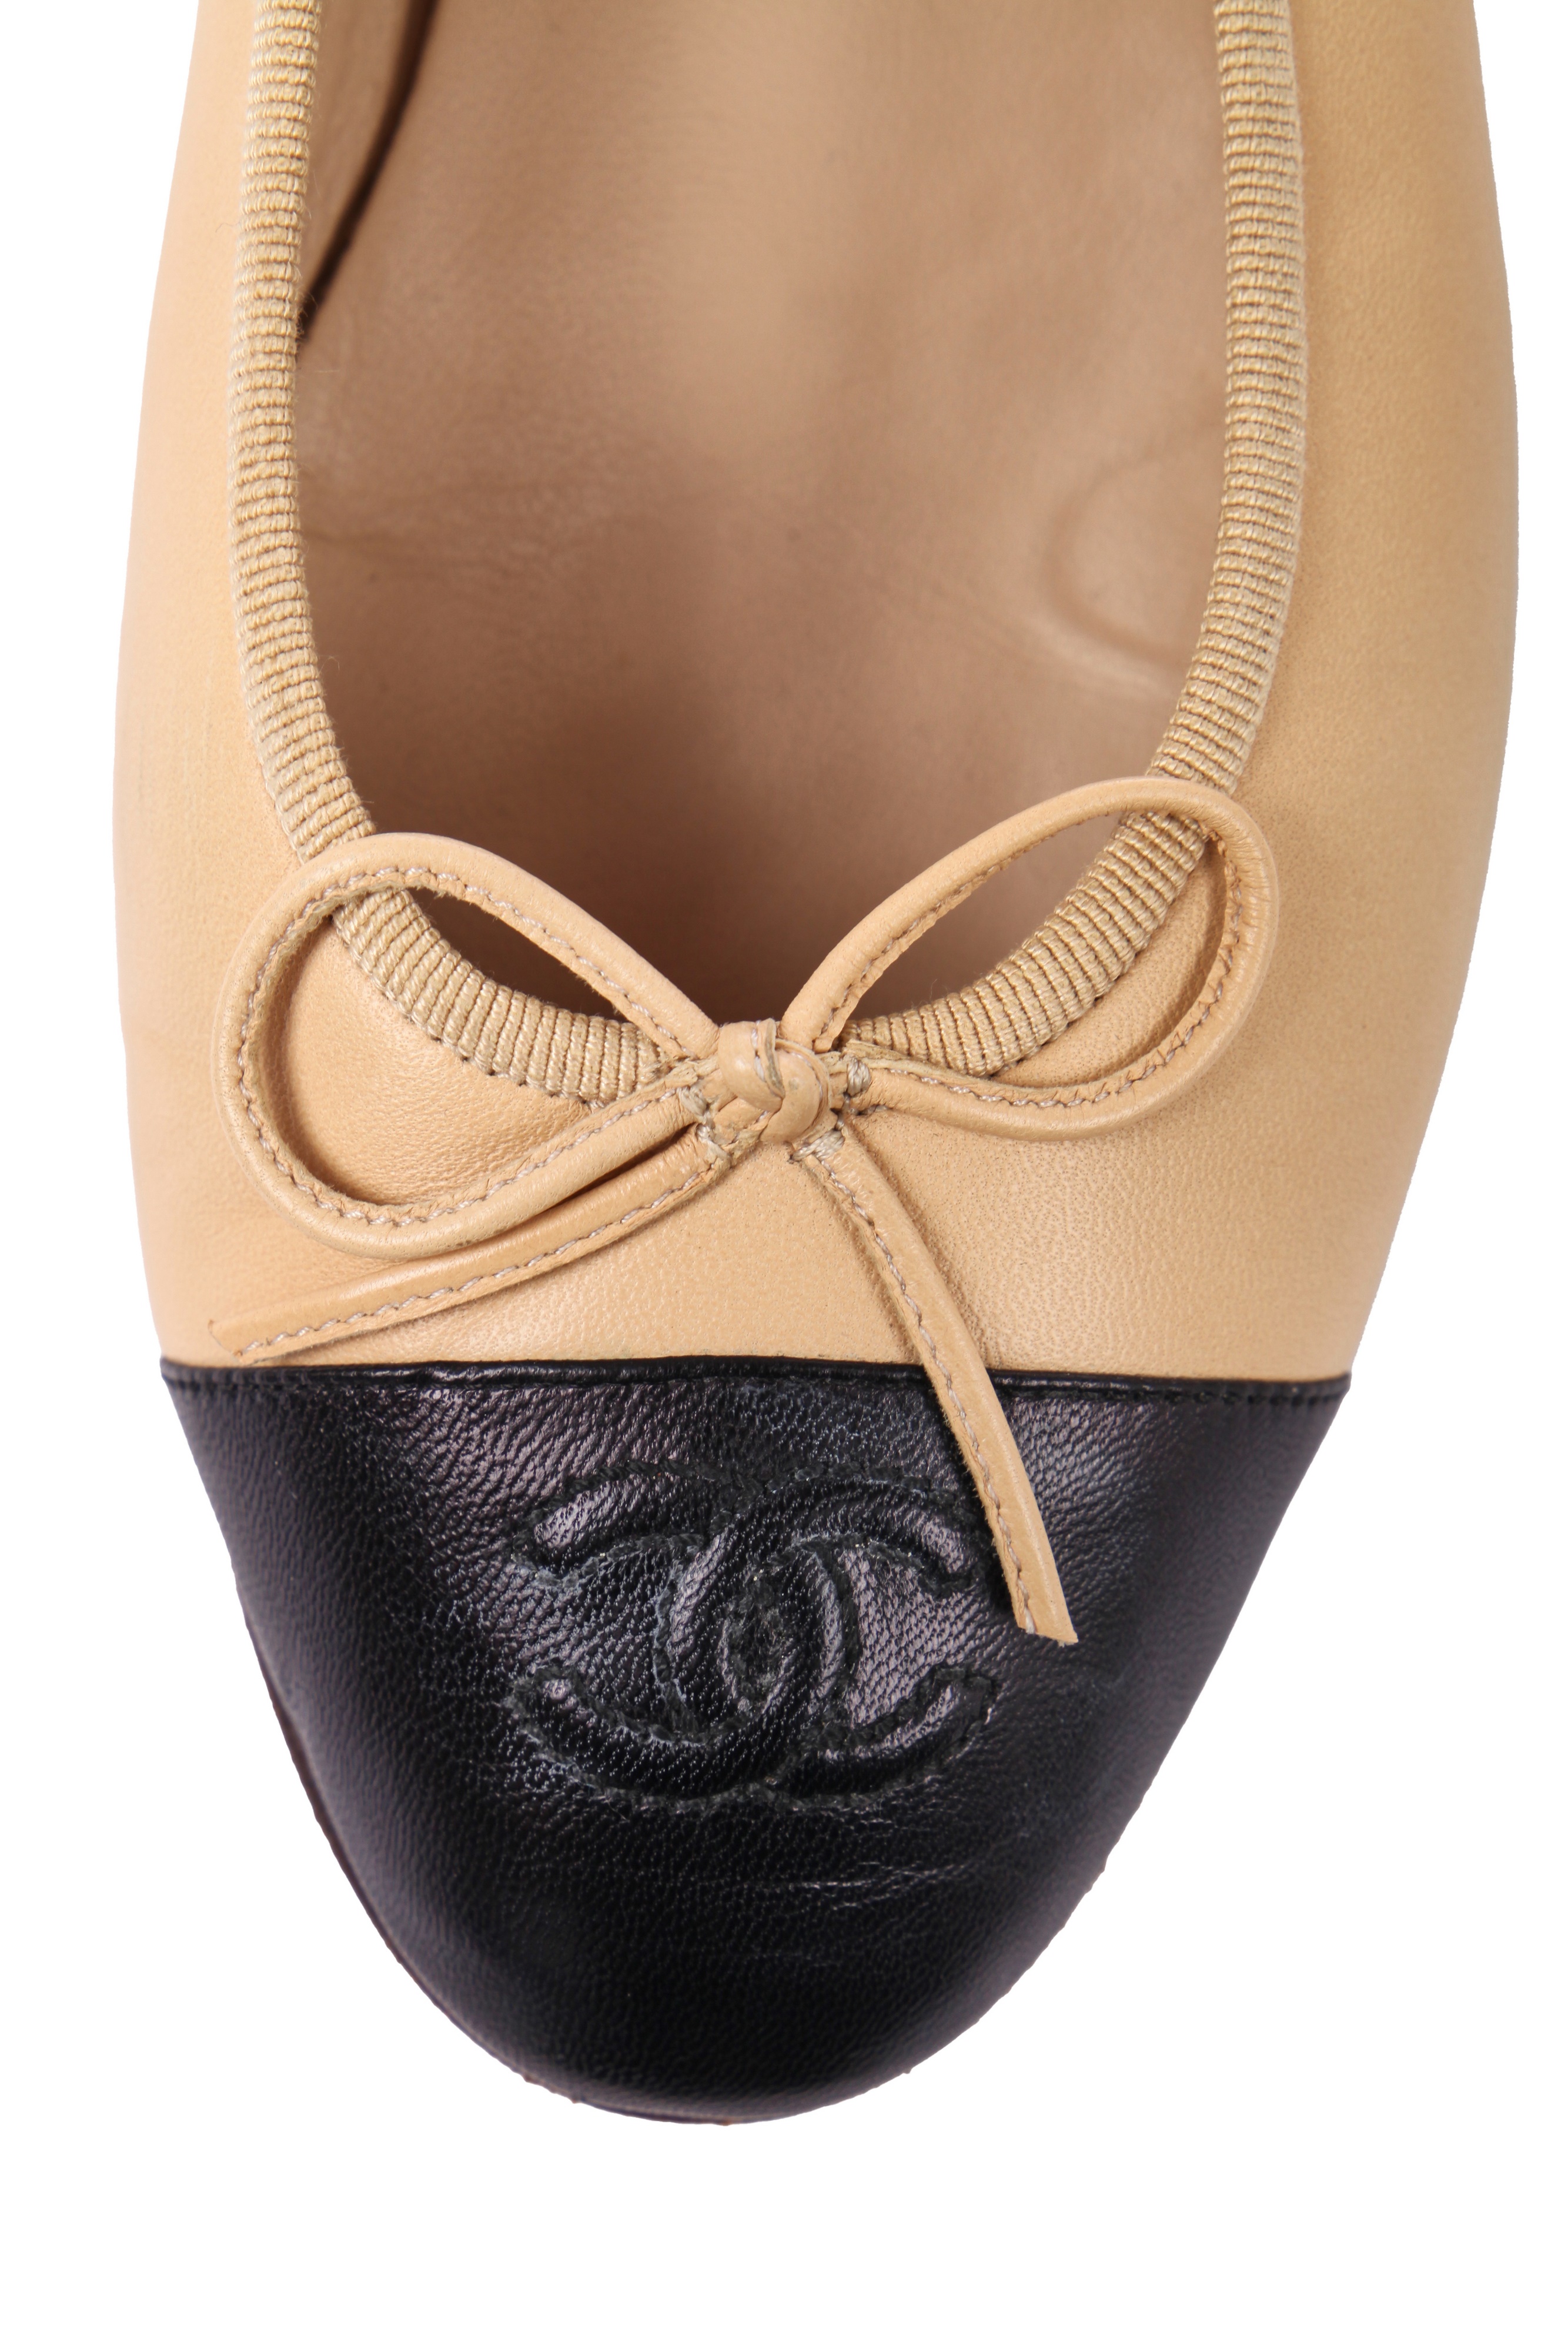 Three Pairs Of Chanel Ballet Flat Shoes Auction